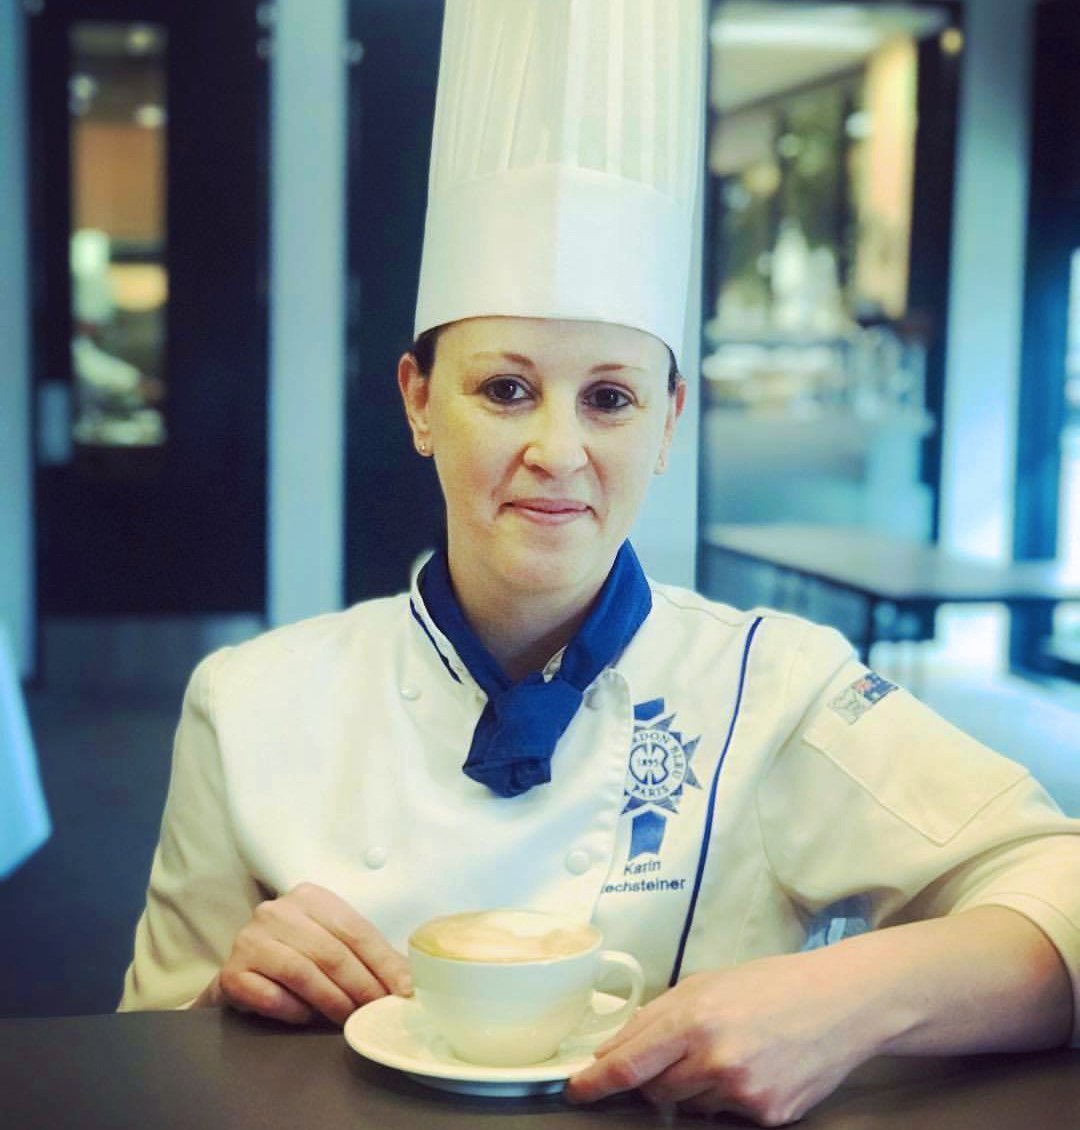 Head Lecturer Karin Rechsteiner in 2020 Culinary Olympics